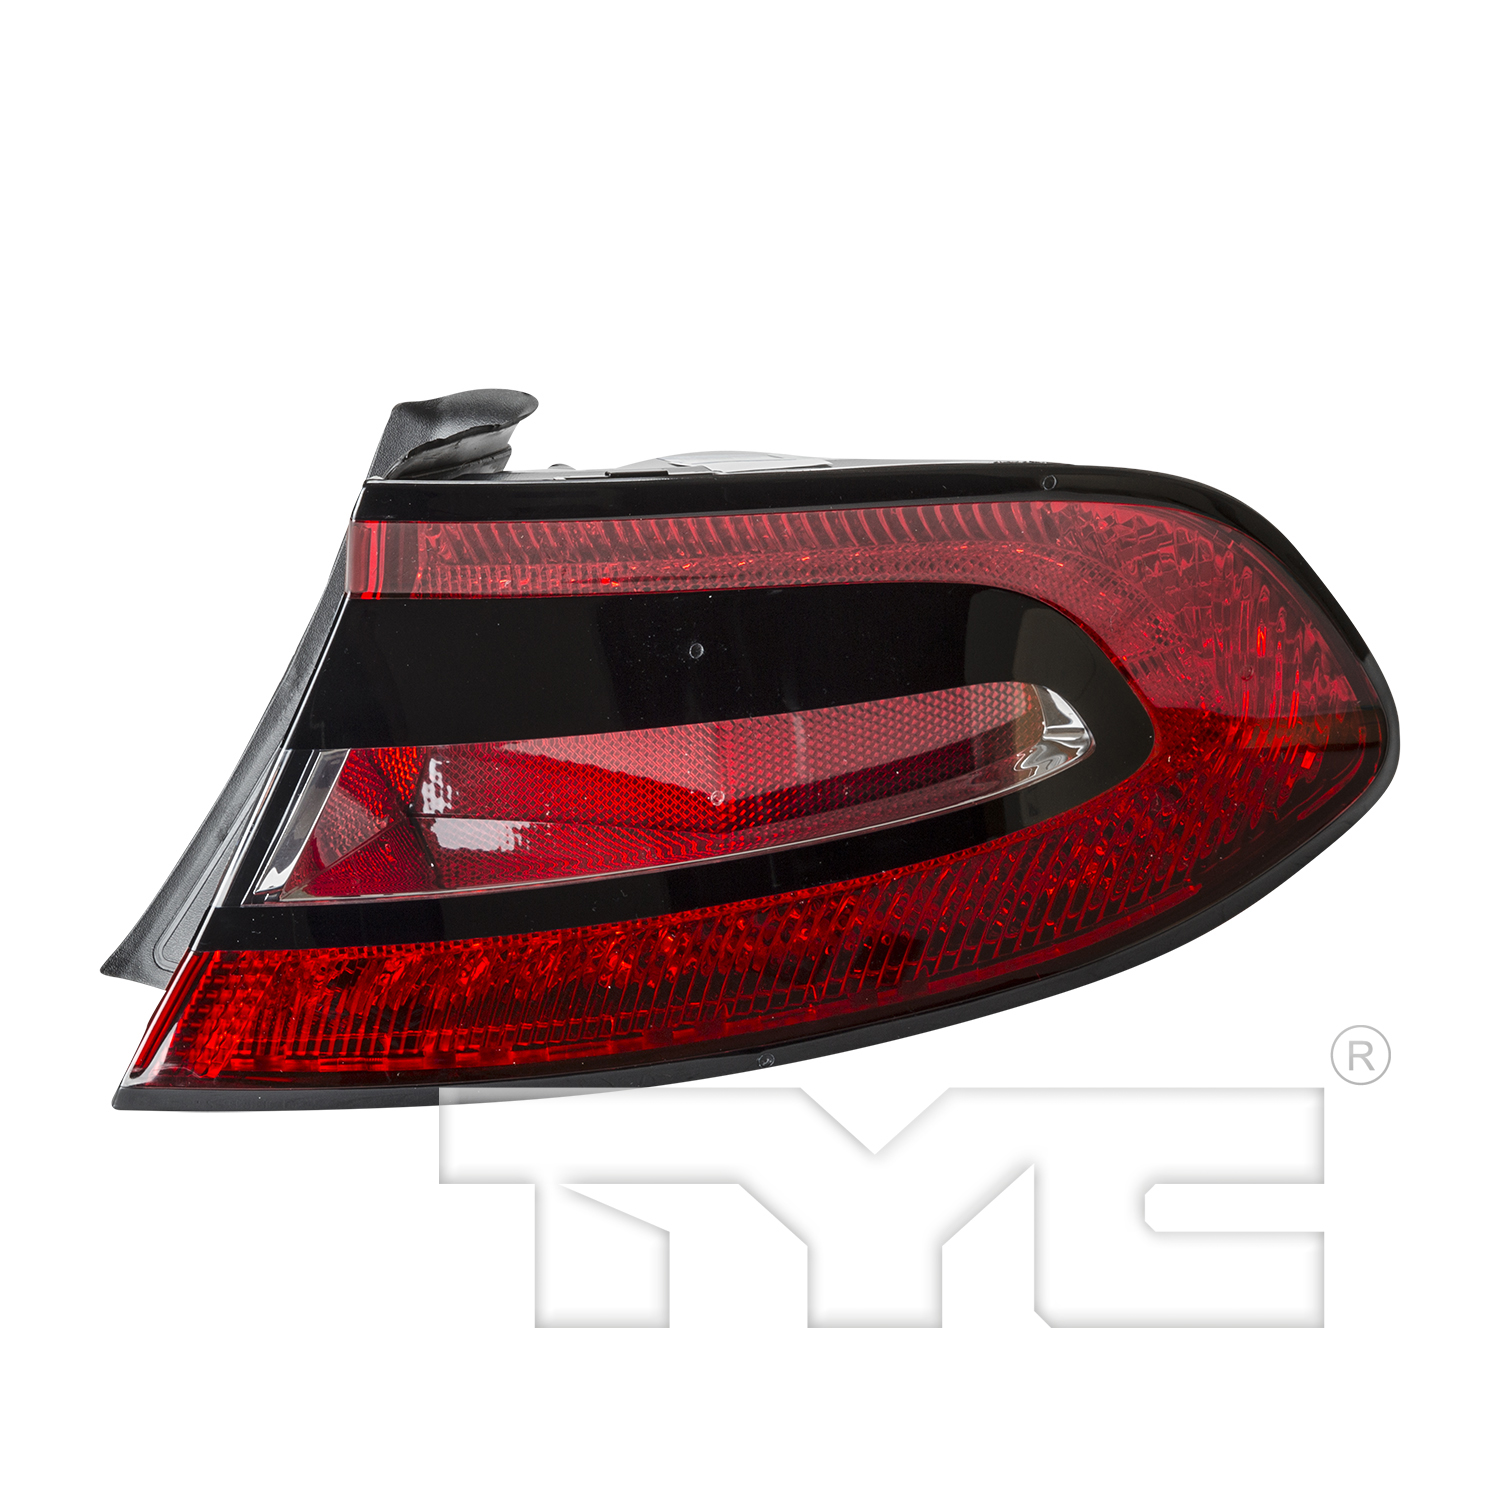 Aftermarket TAILLIGHTS for DODGE - DART, DART,13-16,RT Taillamp assy